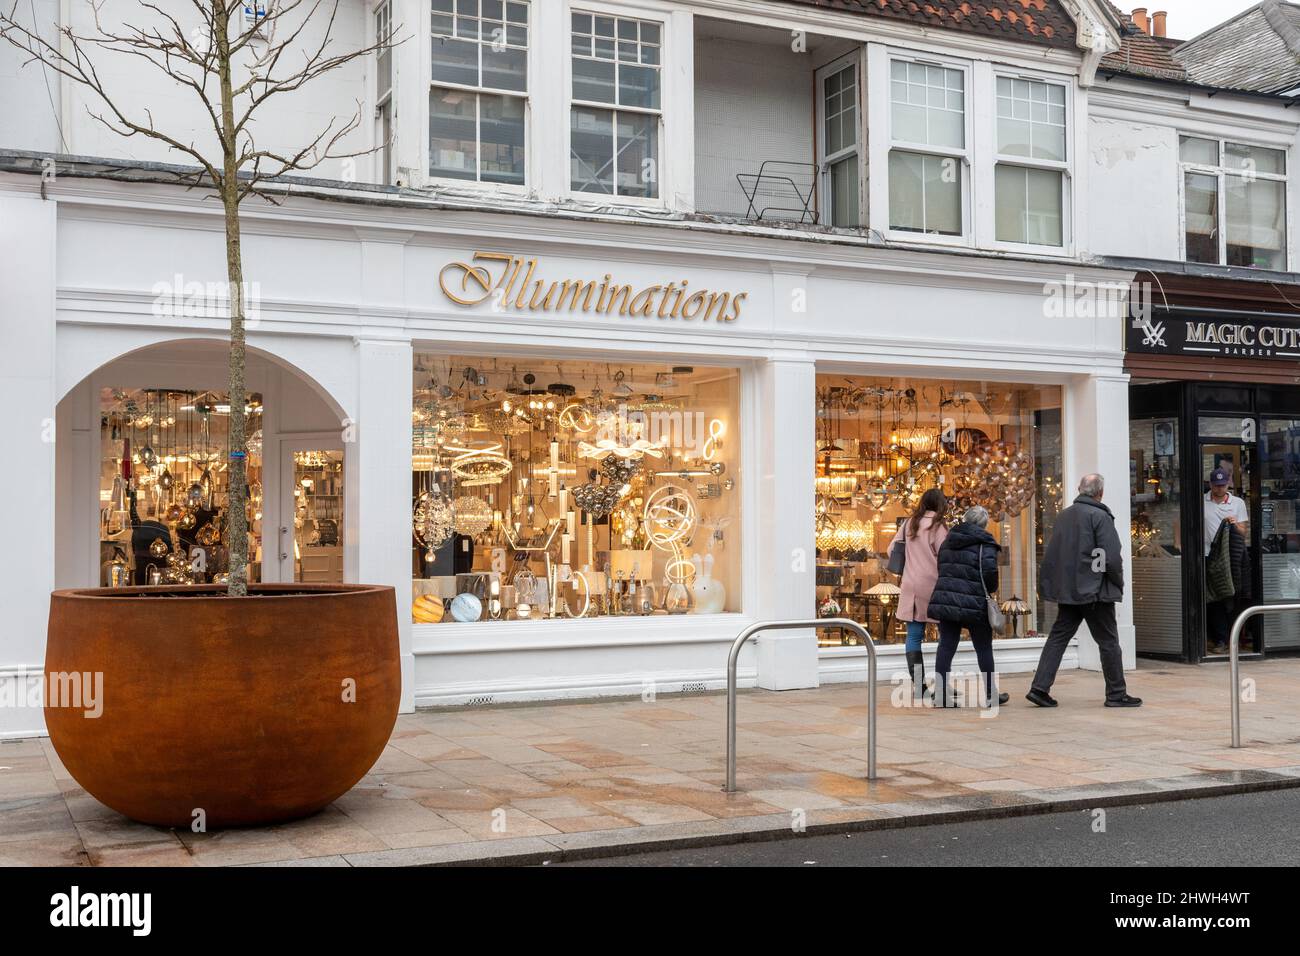 People walking past Illuminations, a high street shop selling lights and lighting in Camberley town centre, Surrey, England, UK Stock Photo